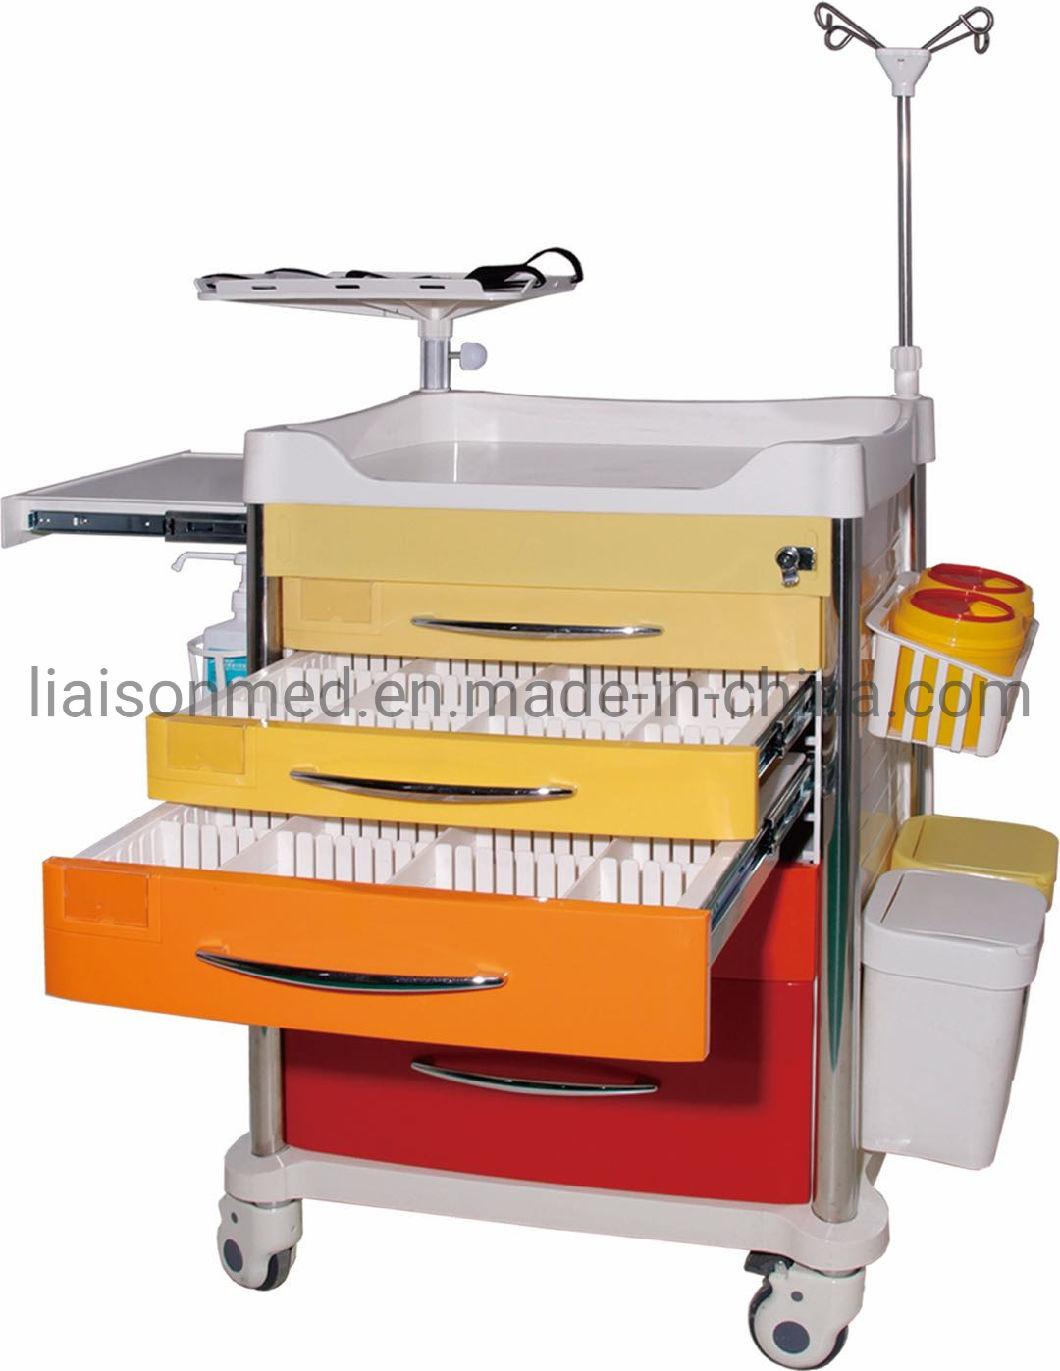 Two Years Warranty Liaison Medicine Trolley with Swivel Casters